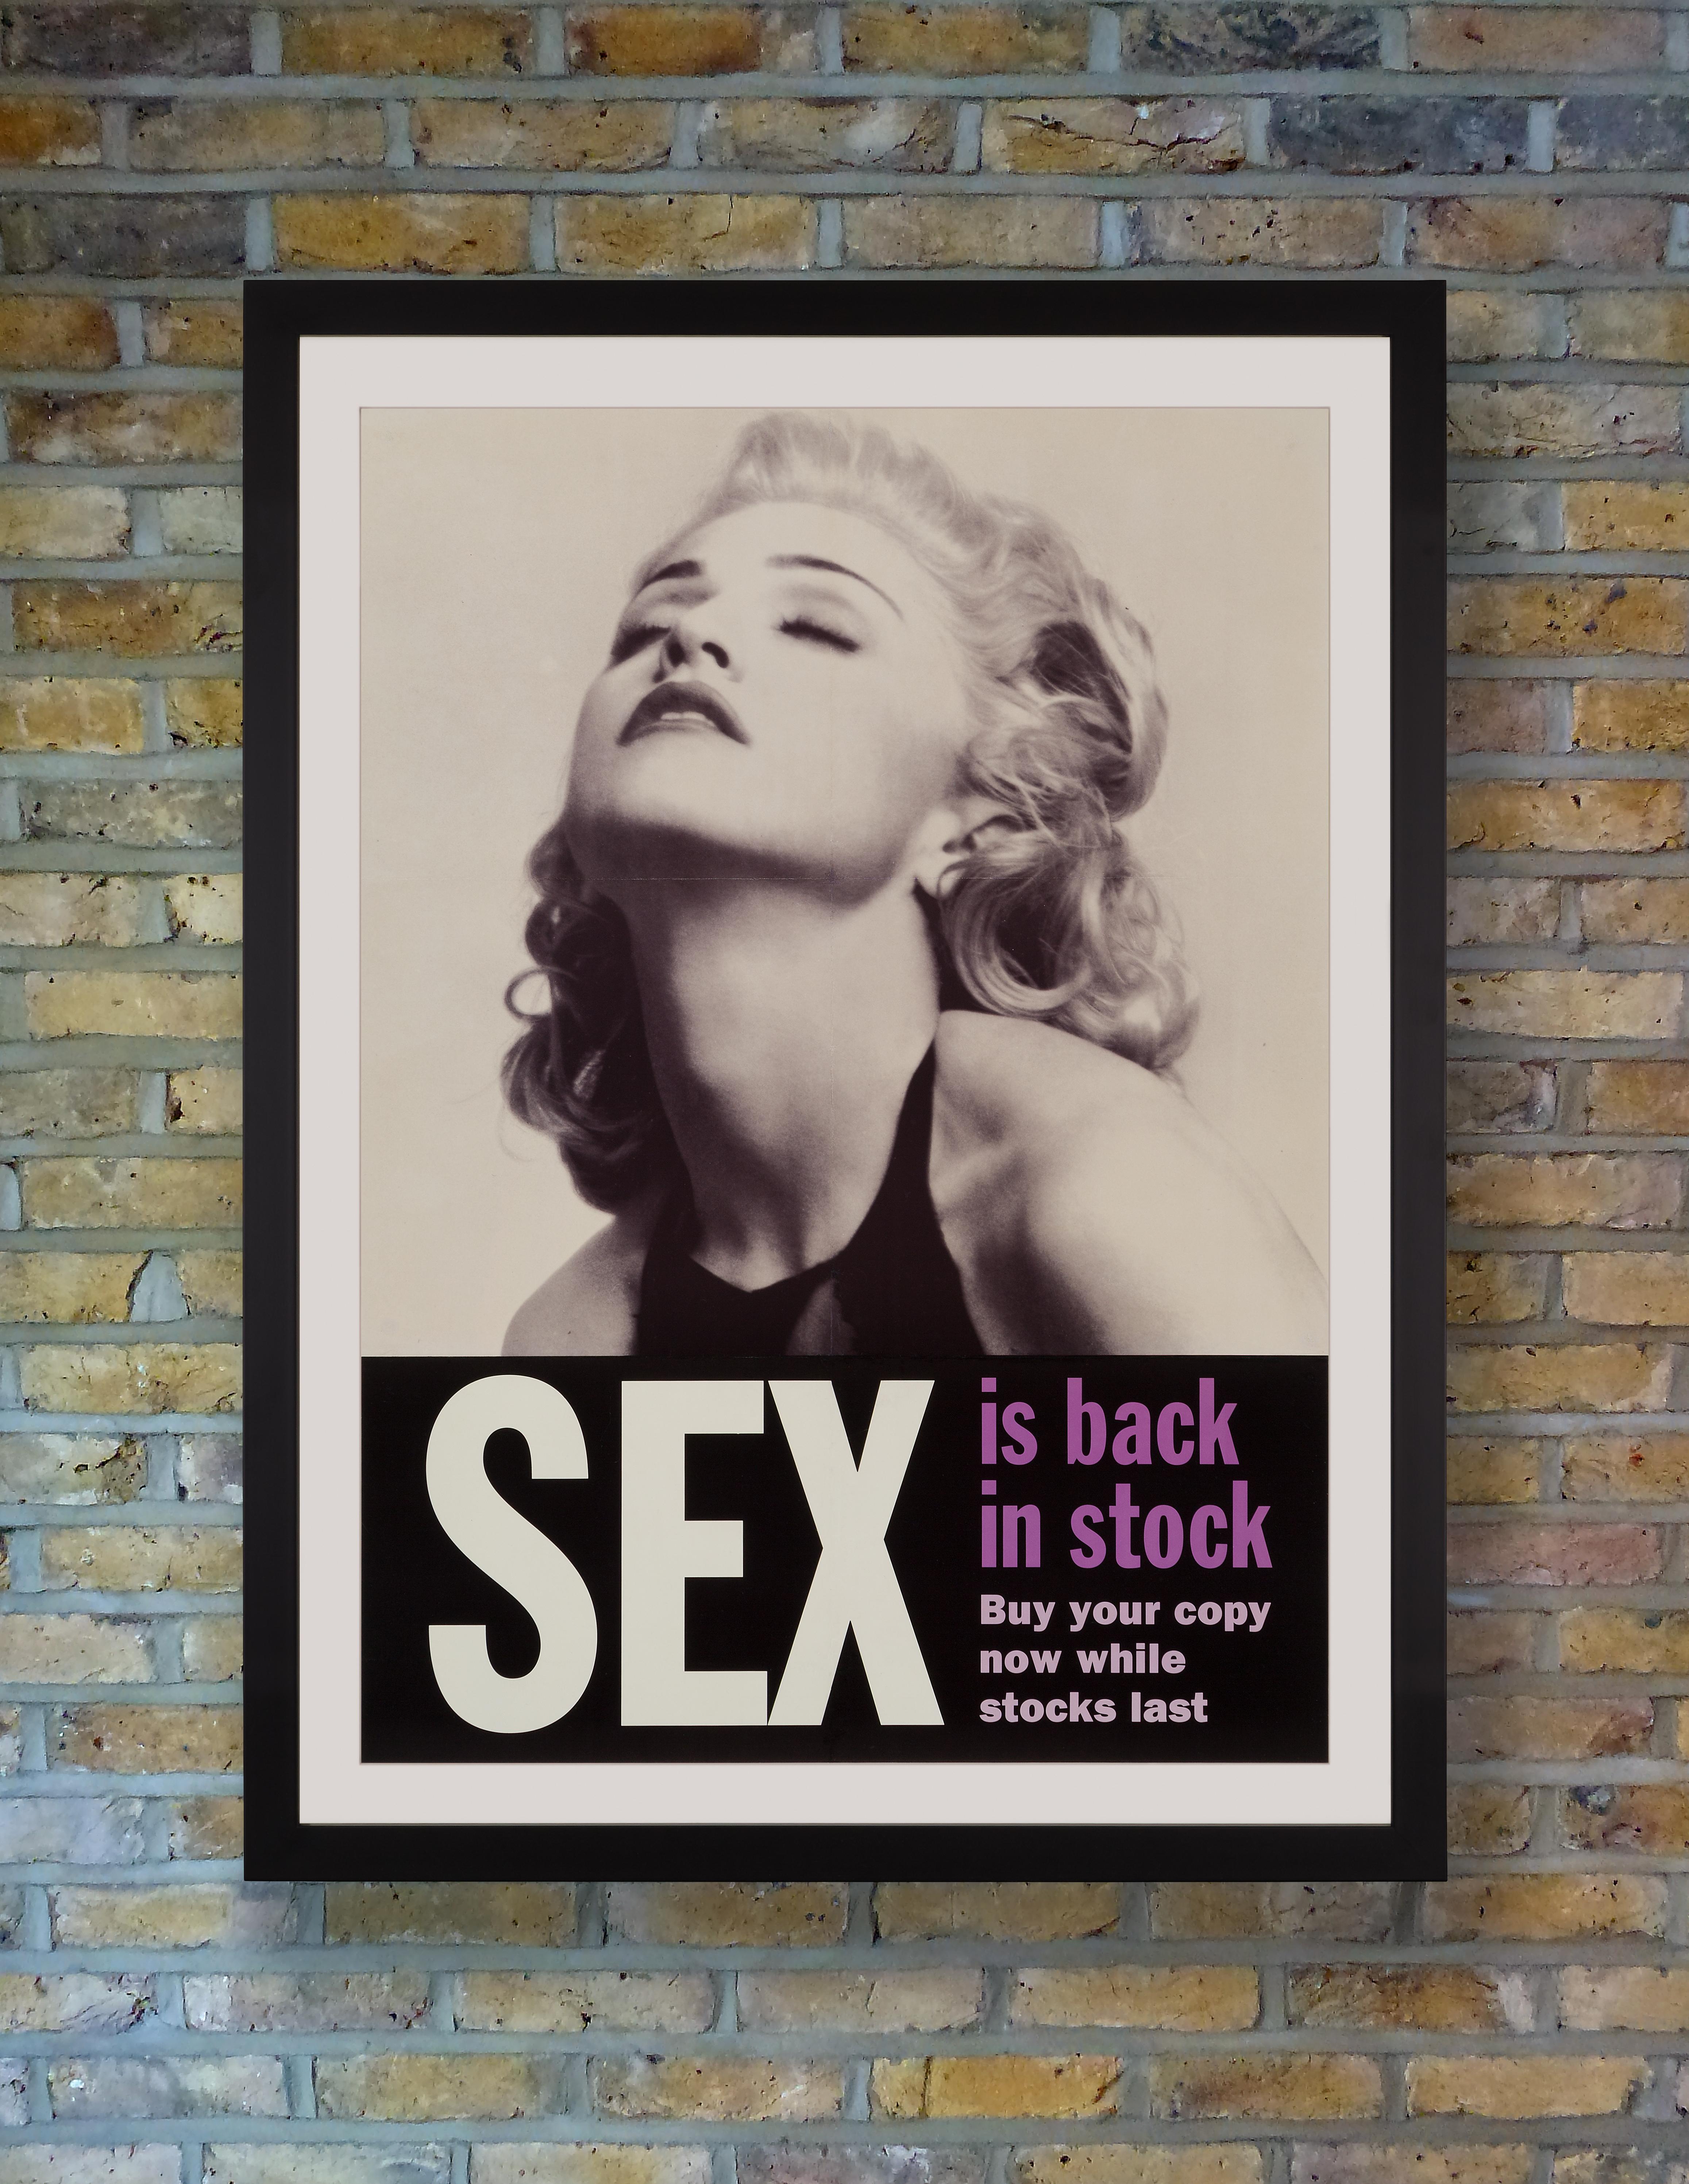 An extremely rare British bookstore promotional poster for Madonna's controversial coffee table book 'Sex,' released on 21st October 1992 by Warner Books, the day after the release of her fifth studio album 'Erotica.' The aluminium-bound book came